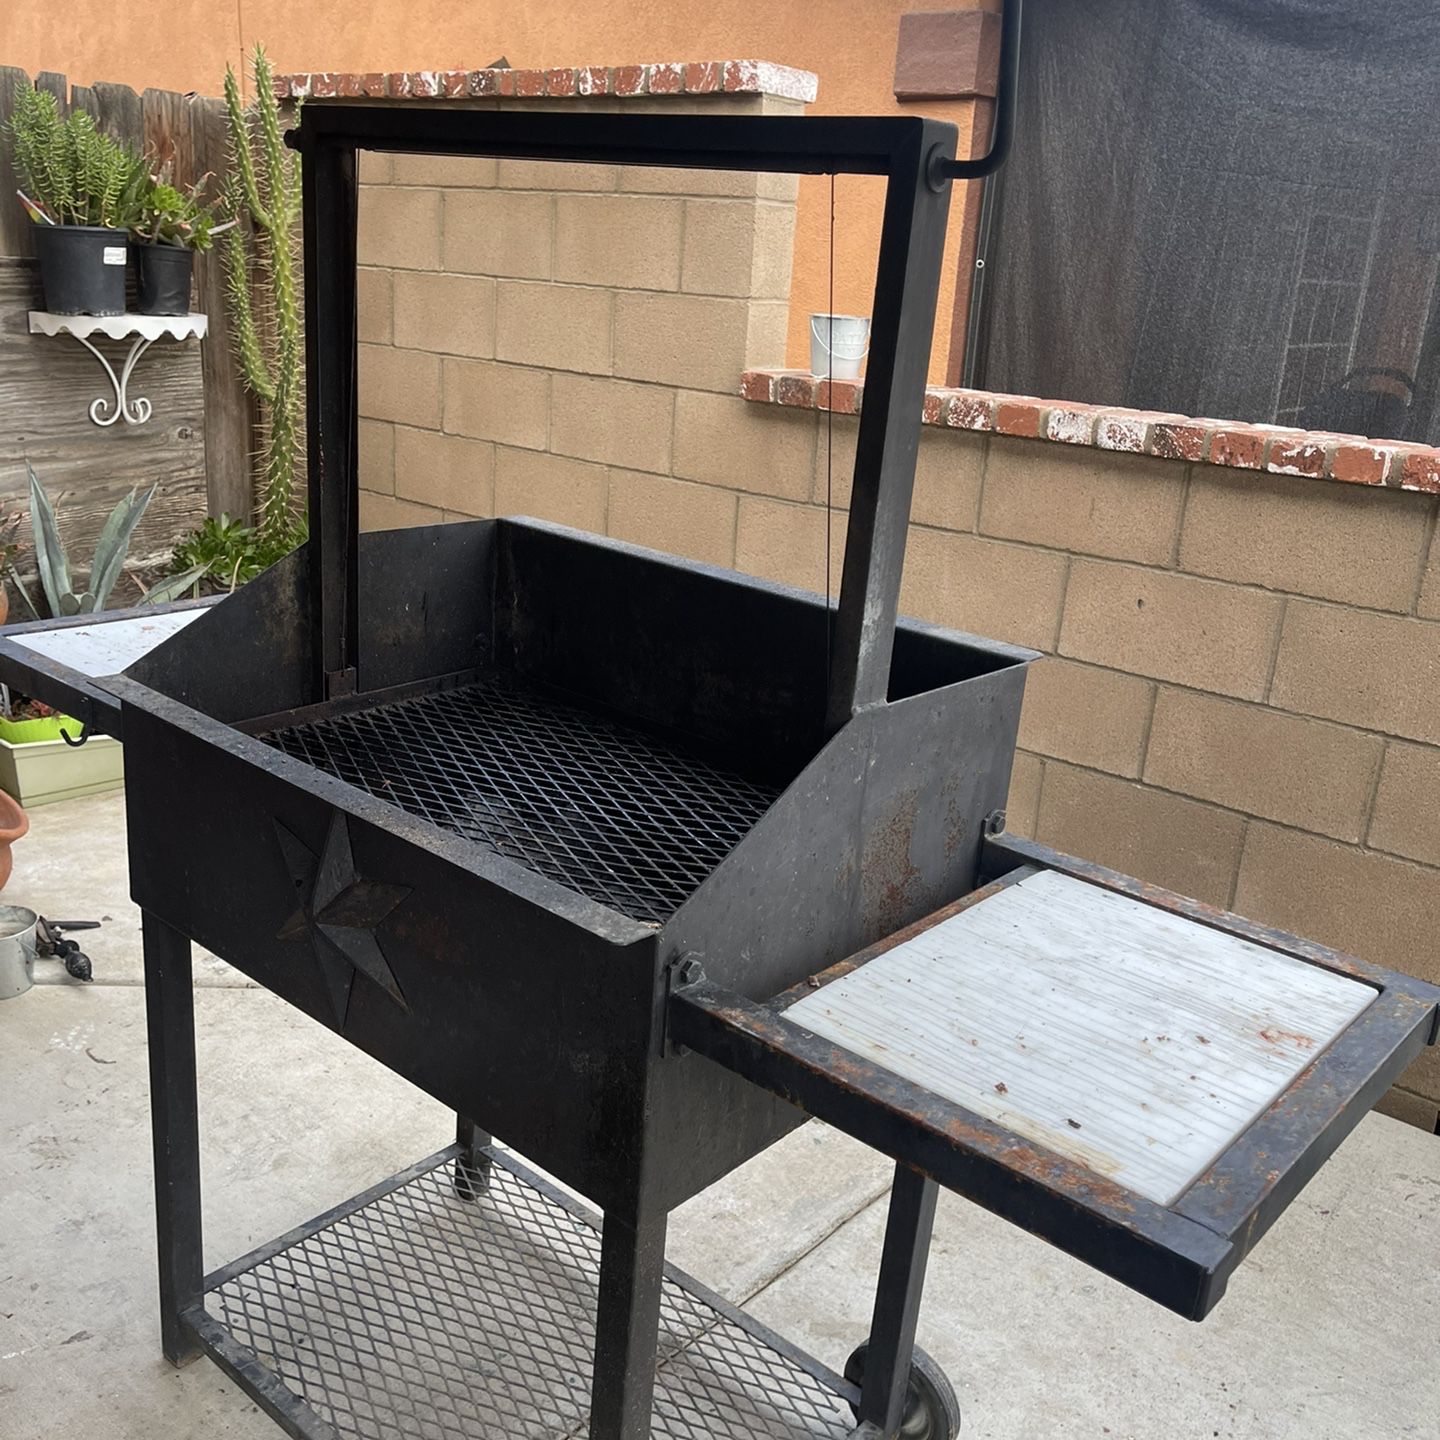 Santa Maria Bbq Grill 250$ Firm for Sale in Bakersfield, CA - OfferUp